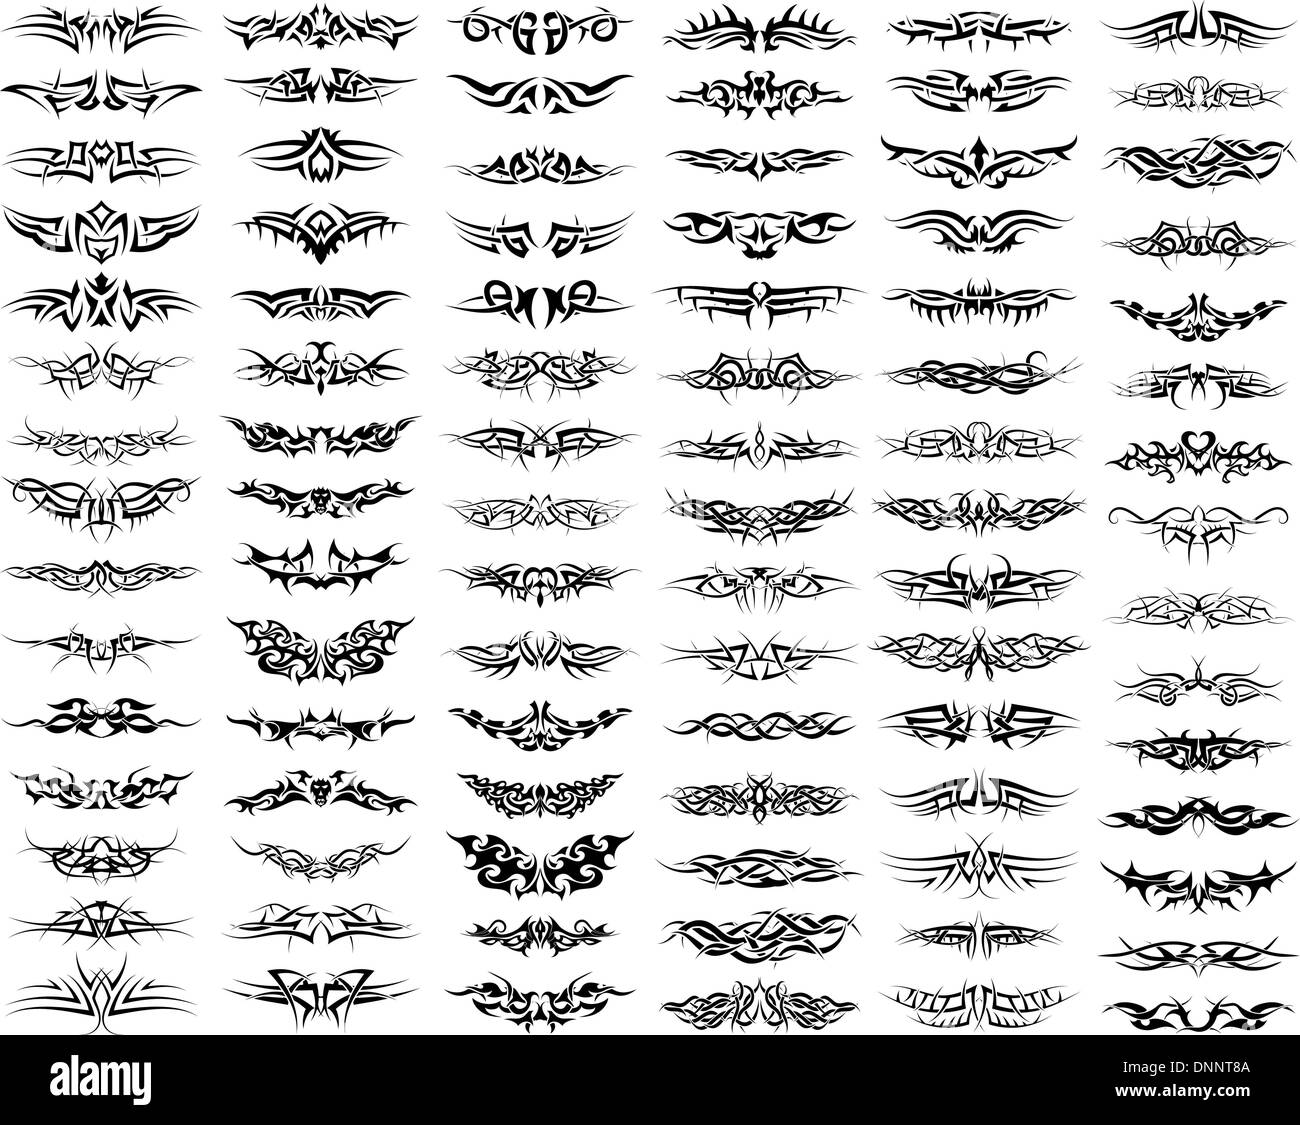 Tribal tattoo set art on an isolated background Vector Image